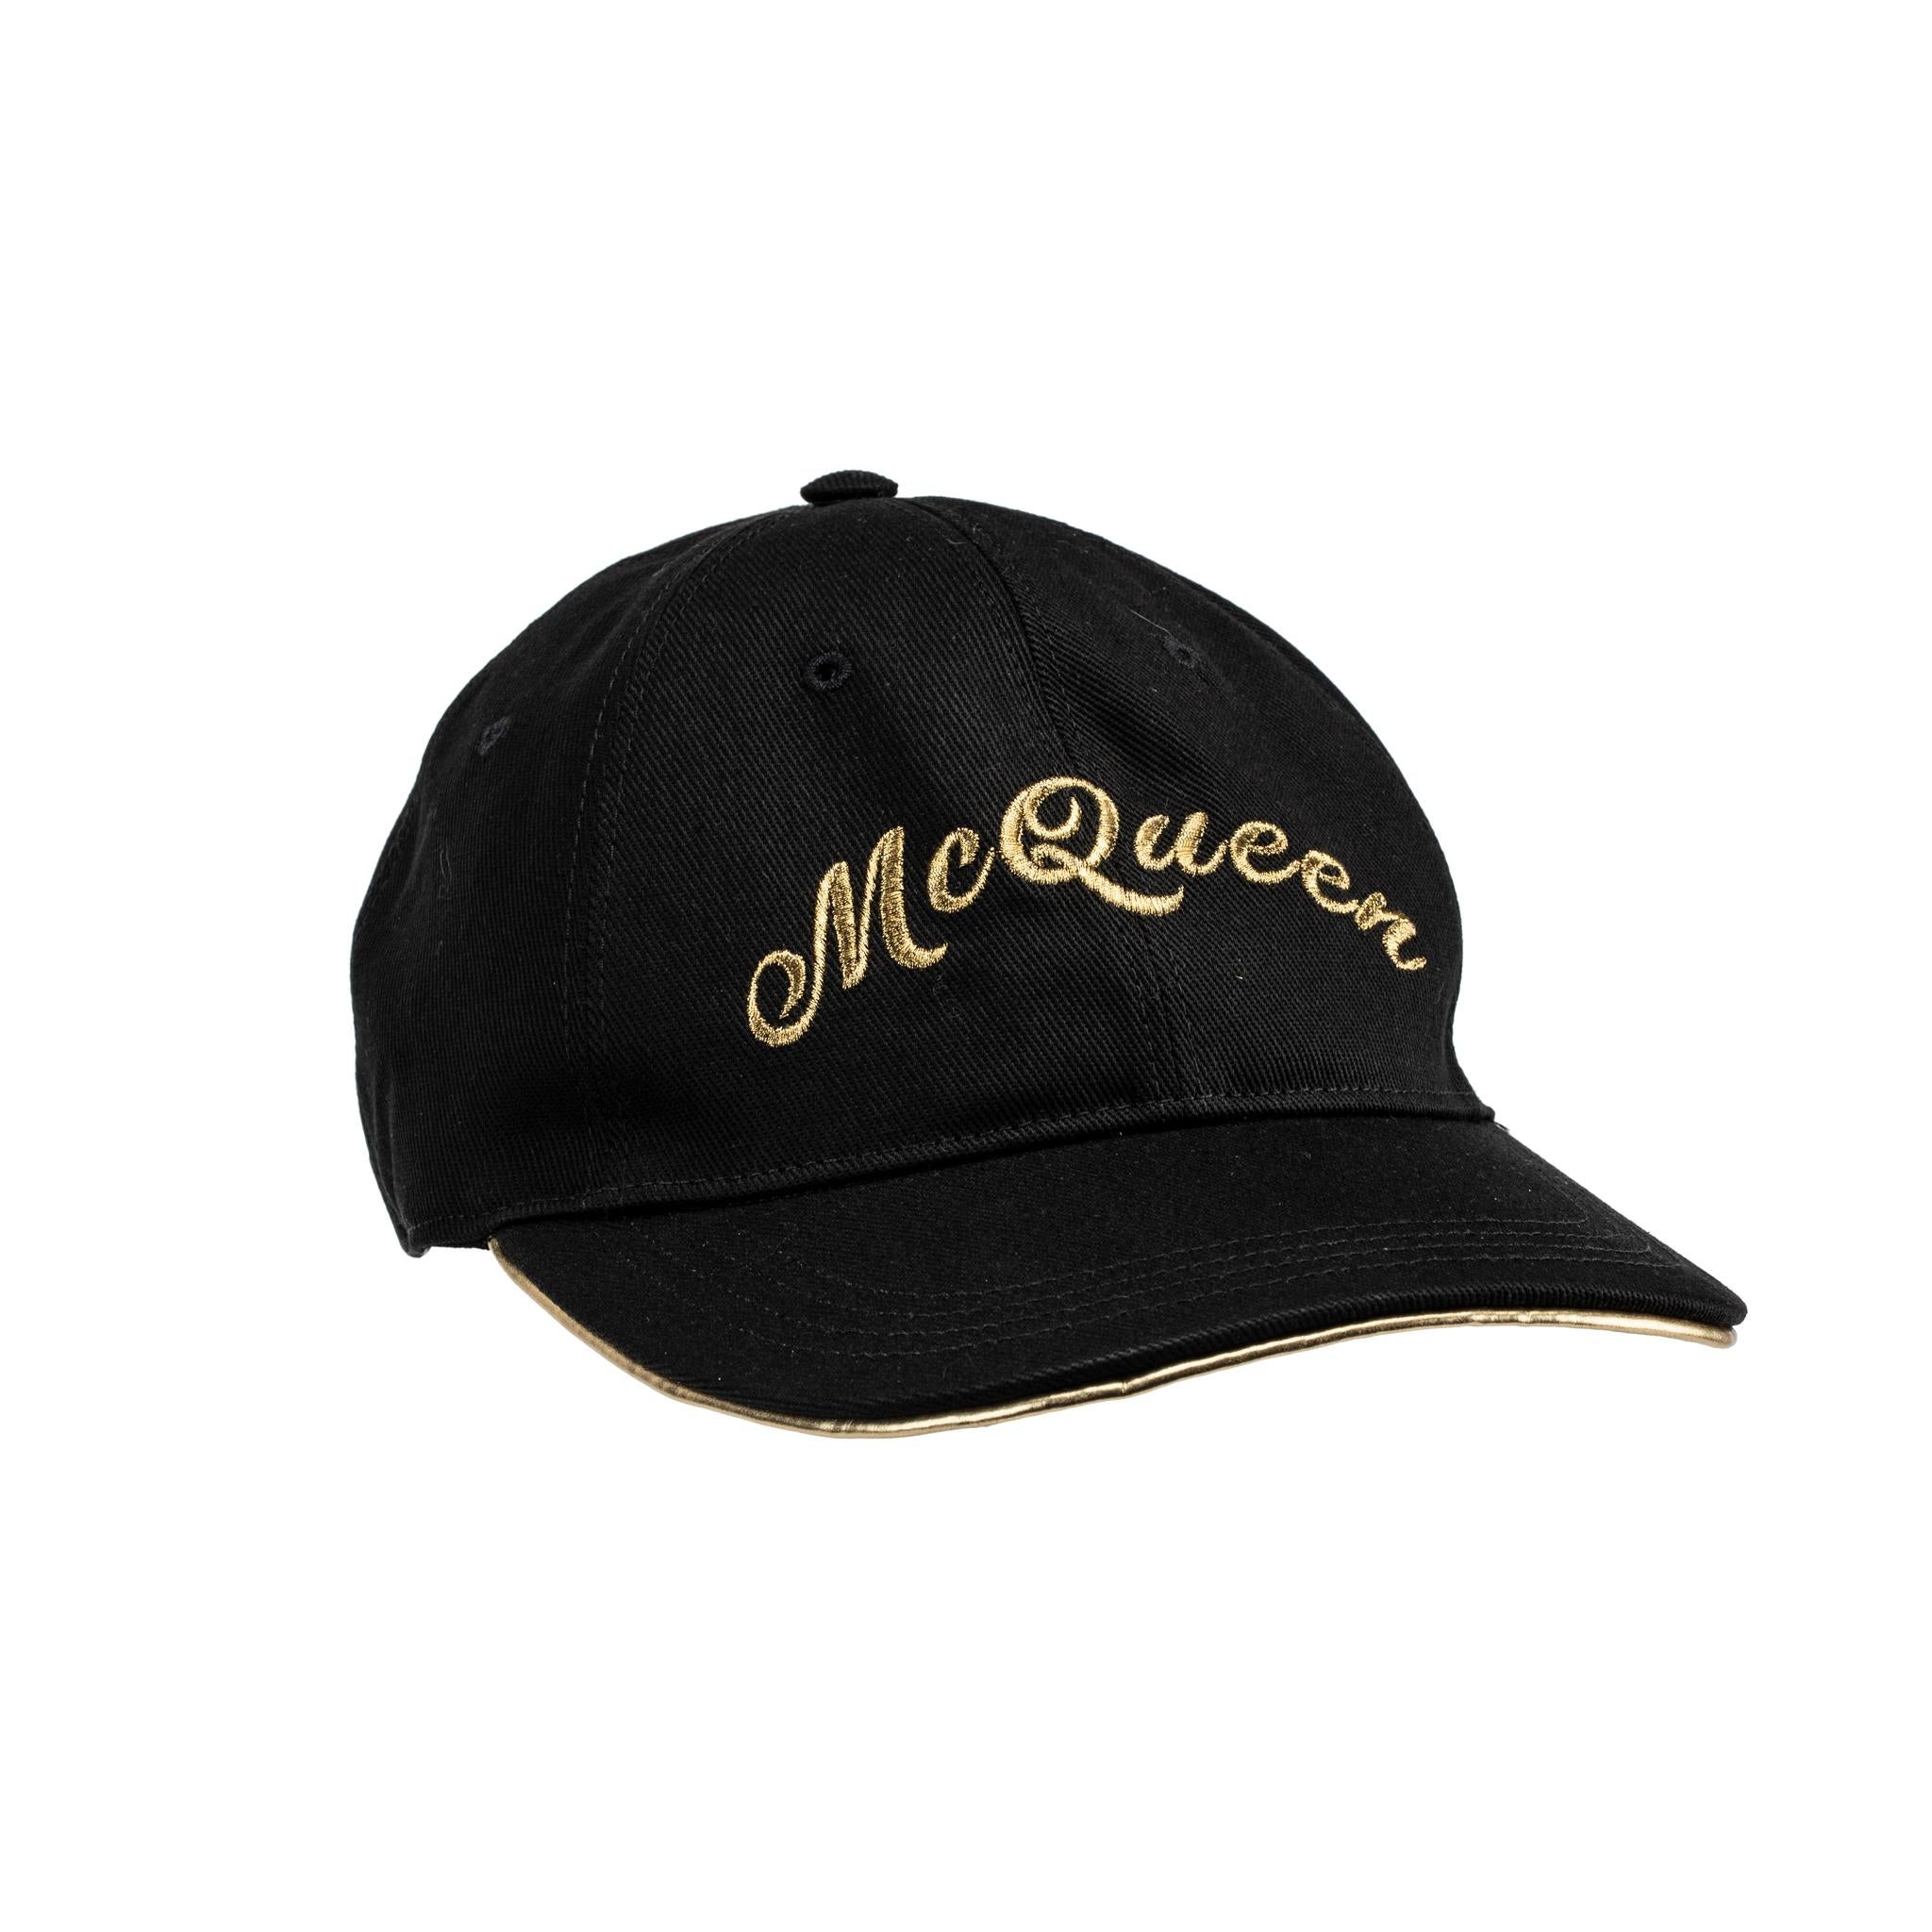 Alexander McQueen Embroidered Cap Black And Gold 

Brand:

Alexander McQueen

Product:

Embroidered Cap

Size:

Adjustable

Colour:

Black & Gold

Material:

Cotton & Canvas

Condition:

Pristine; Never Worn

Accompanied By:

Alexander McQueen Hat &